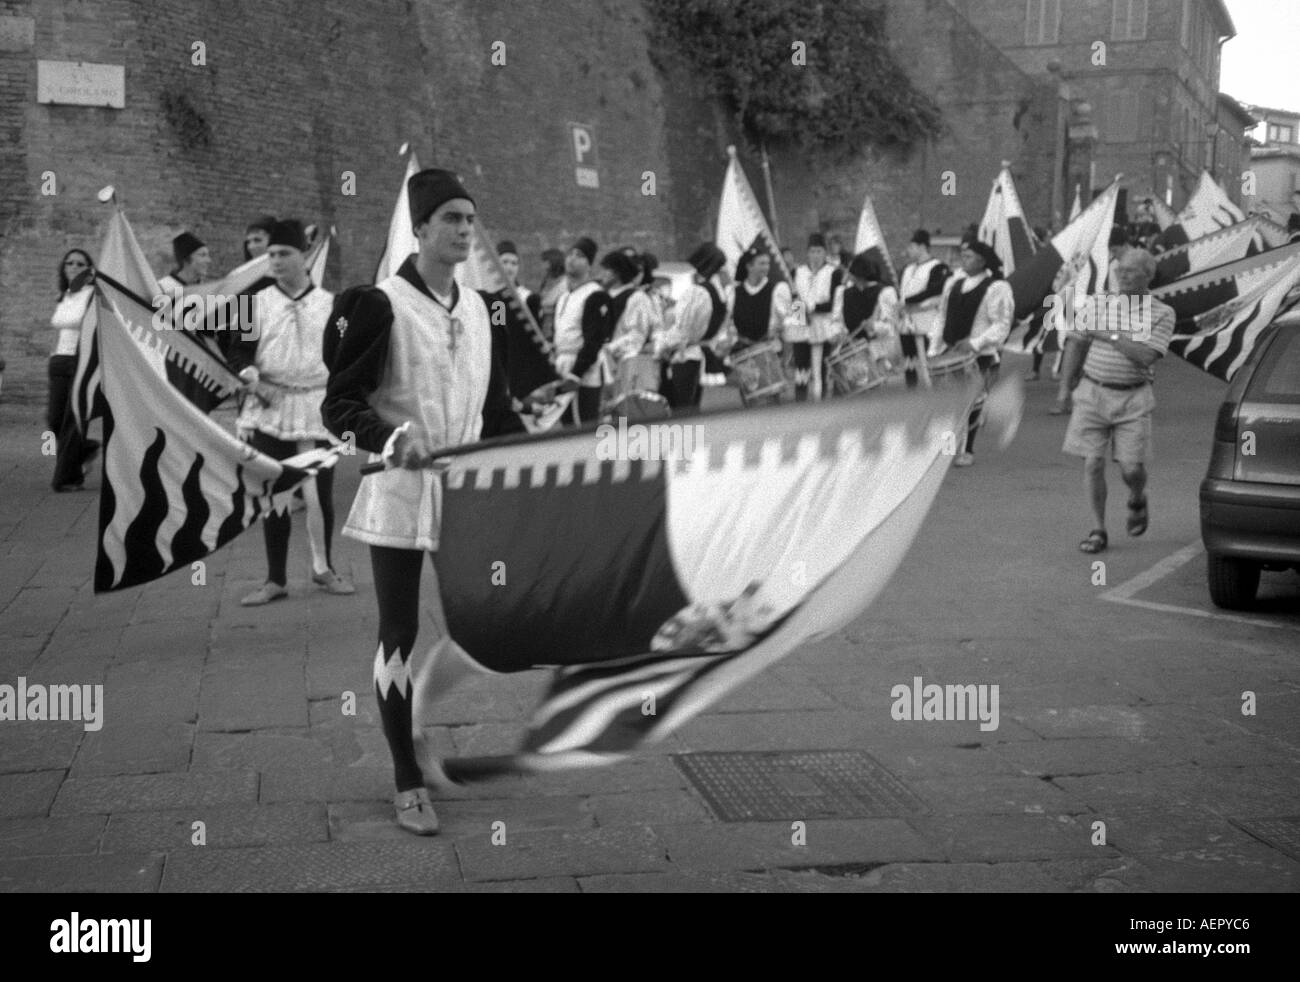 Colorful Street Parade of Flag Throwers in Medieval Costumes Palio UNESCO World Heritage Site Siena Central Italy Italia Europe Stock Photo